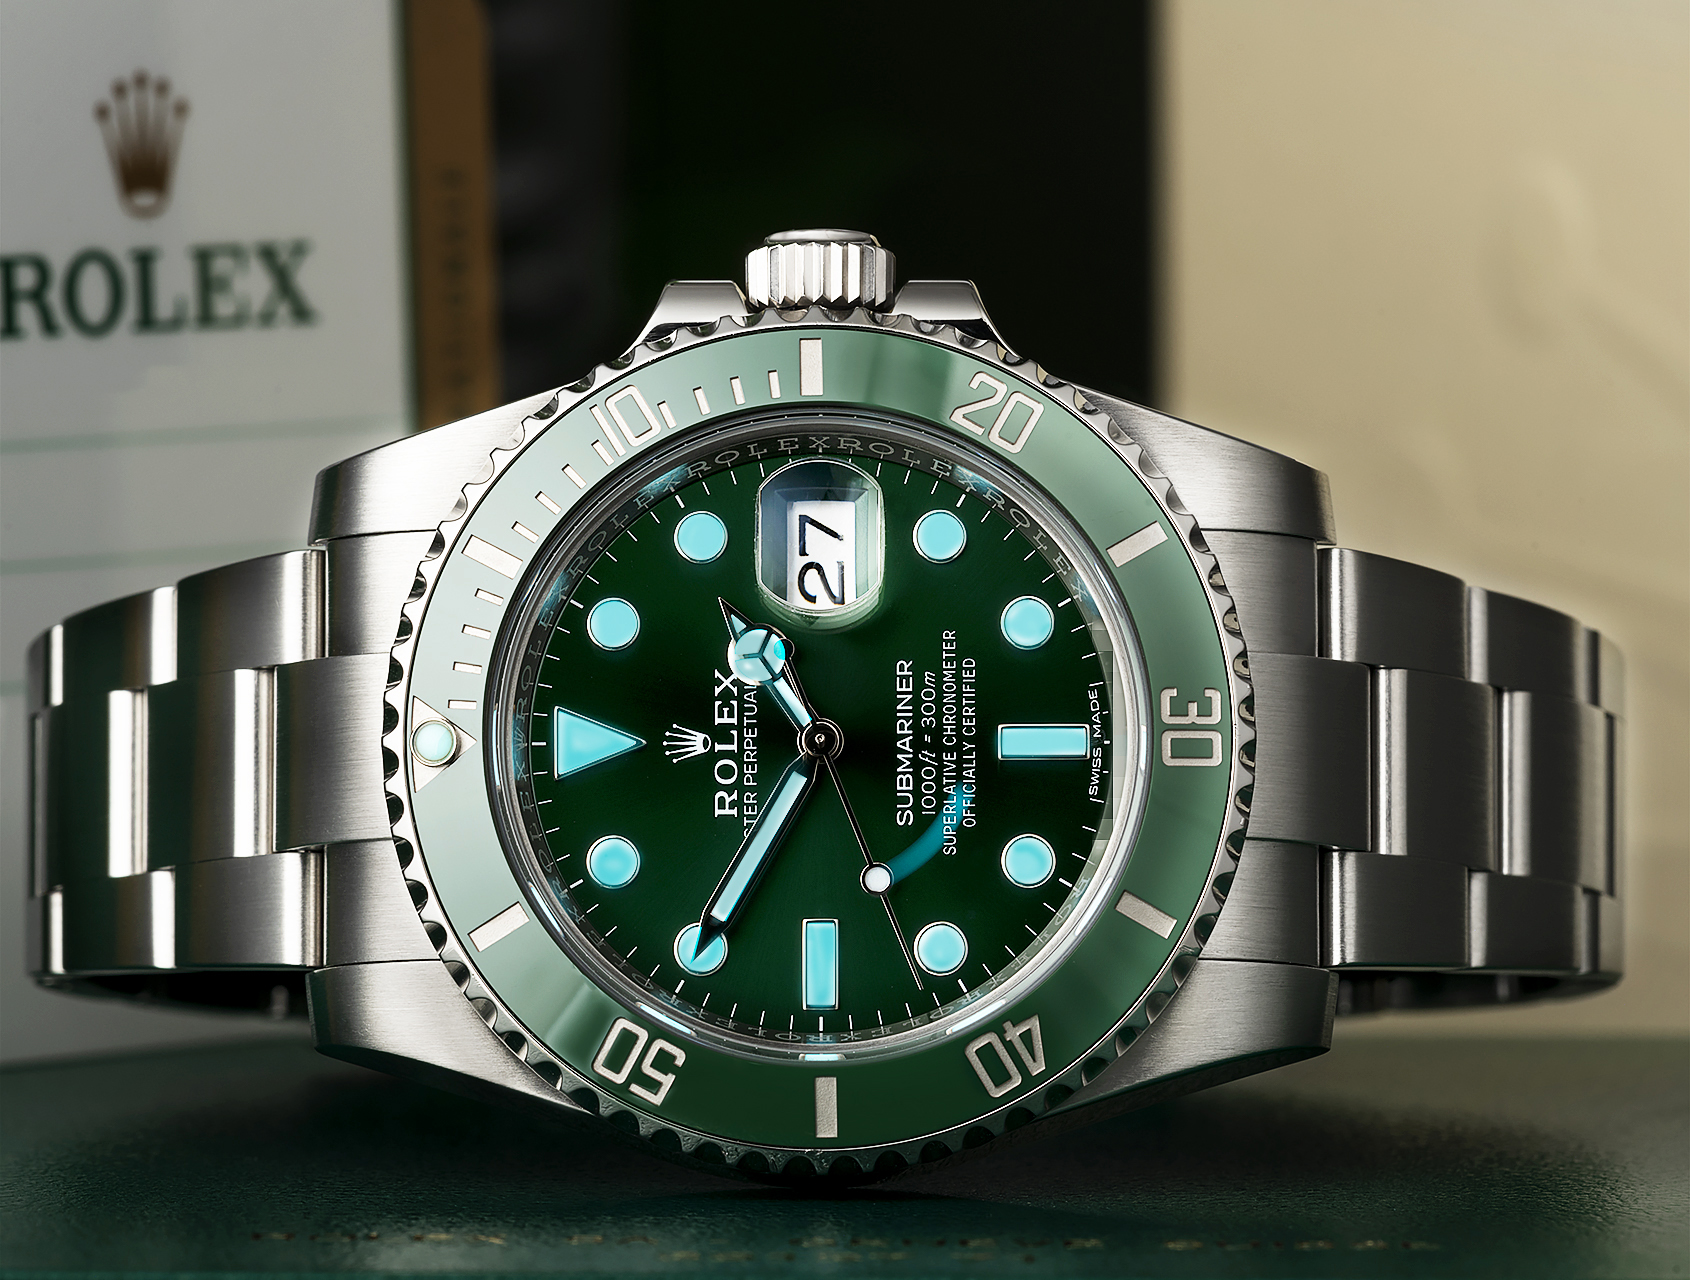 ROLEX HULK SUBMARINER GREEN DIAL AND BEZEL 116610LV - Carr Watches